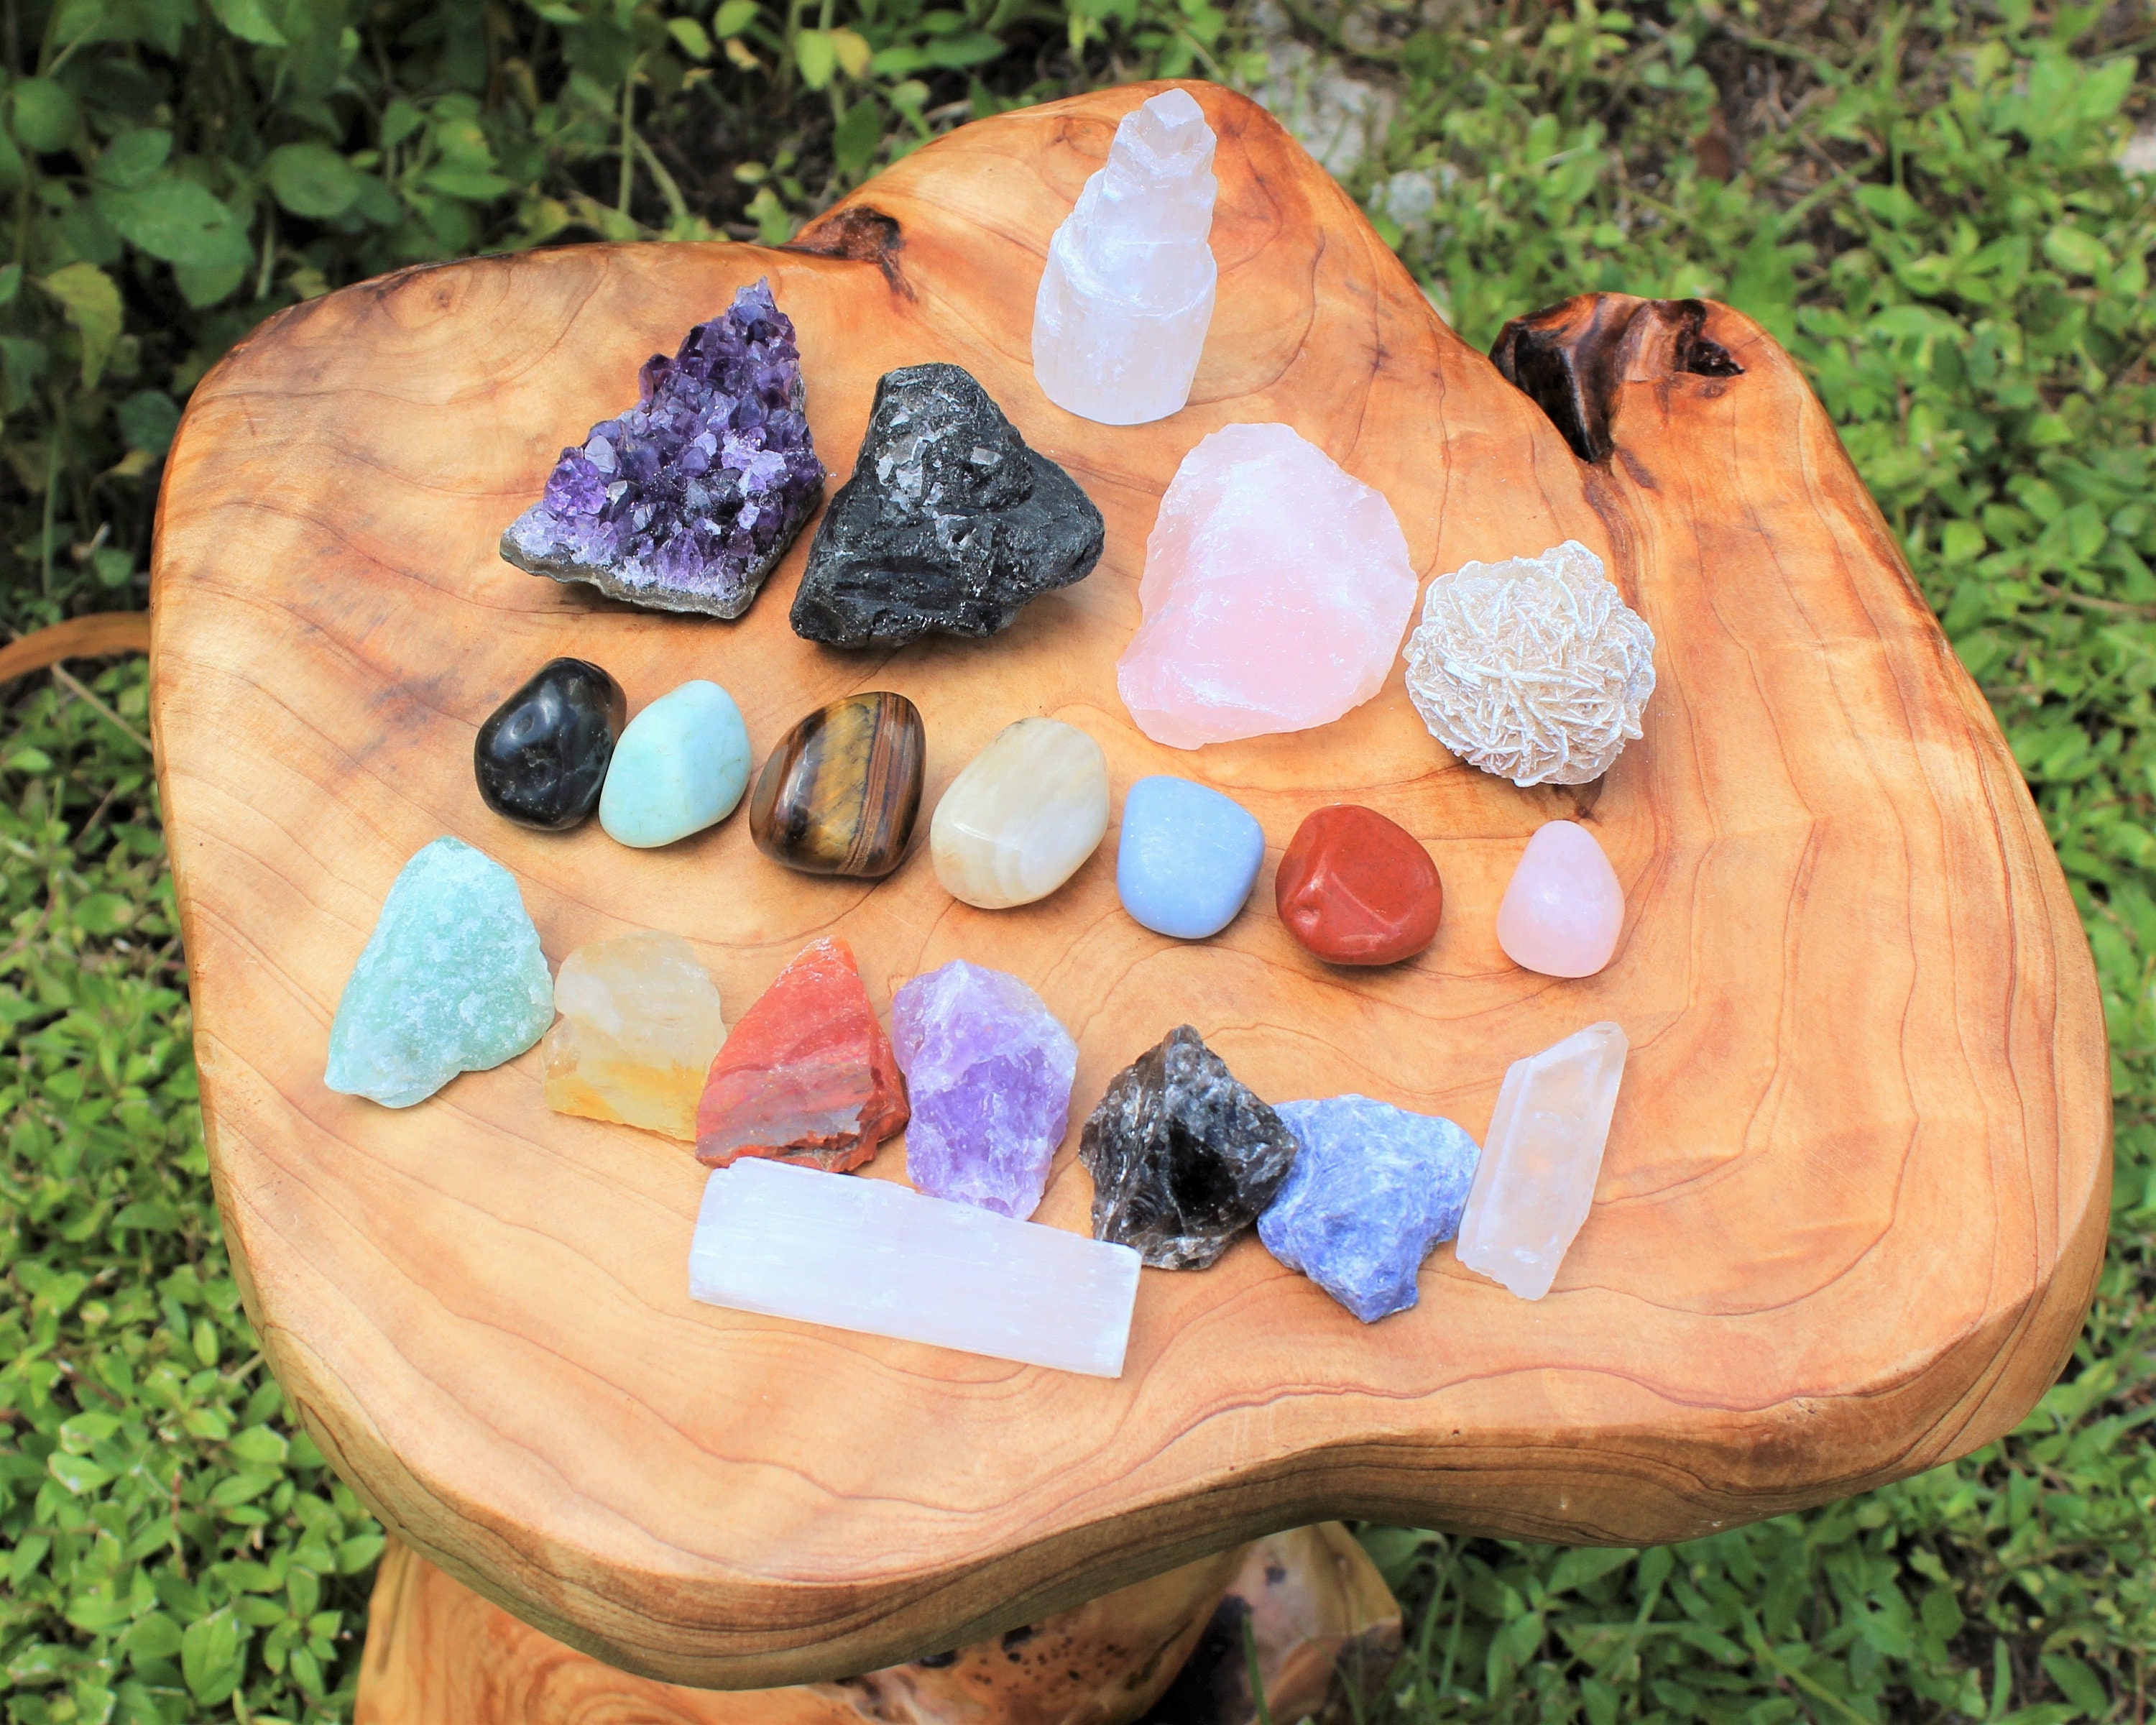 Chakra Mineral Starter Set/Crystal Healing Kit ~ 6 Colorful Mineral Stones Plus 